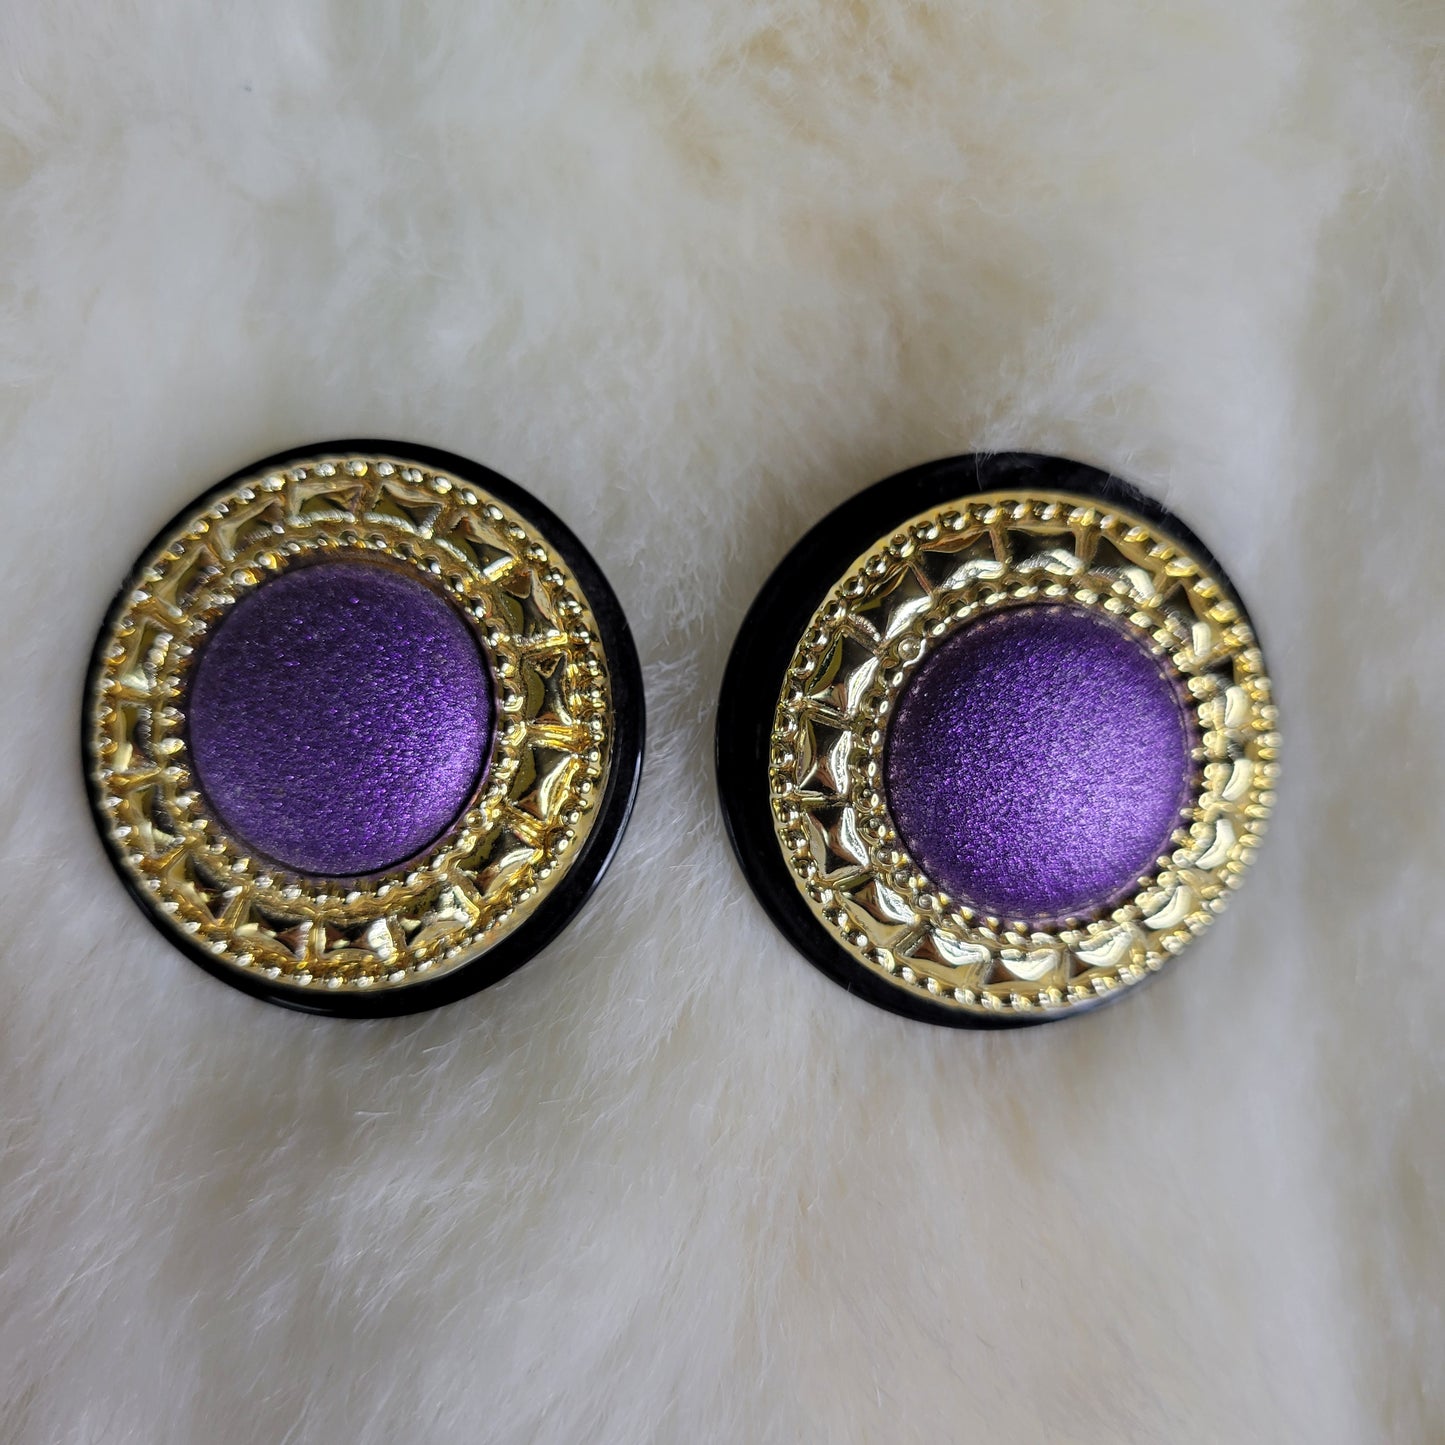 Extra Large Vintage 1980s Purple and Gold Button Earrings - Pierced